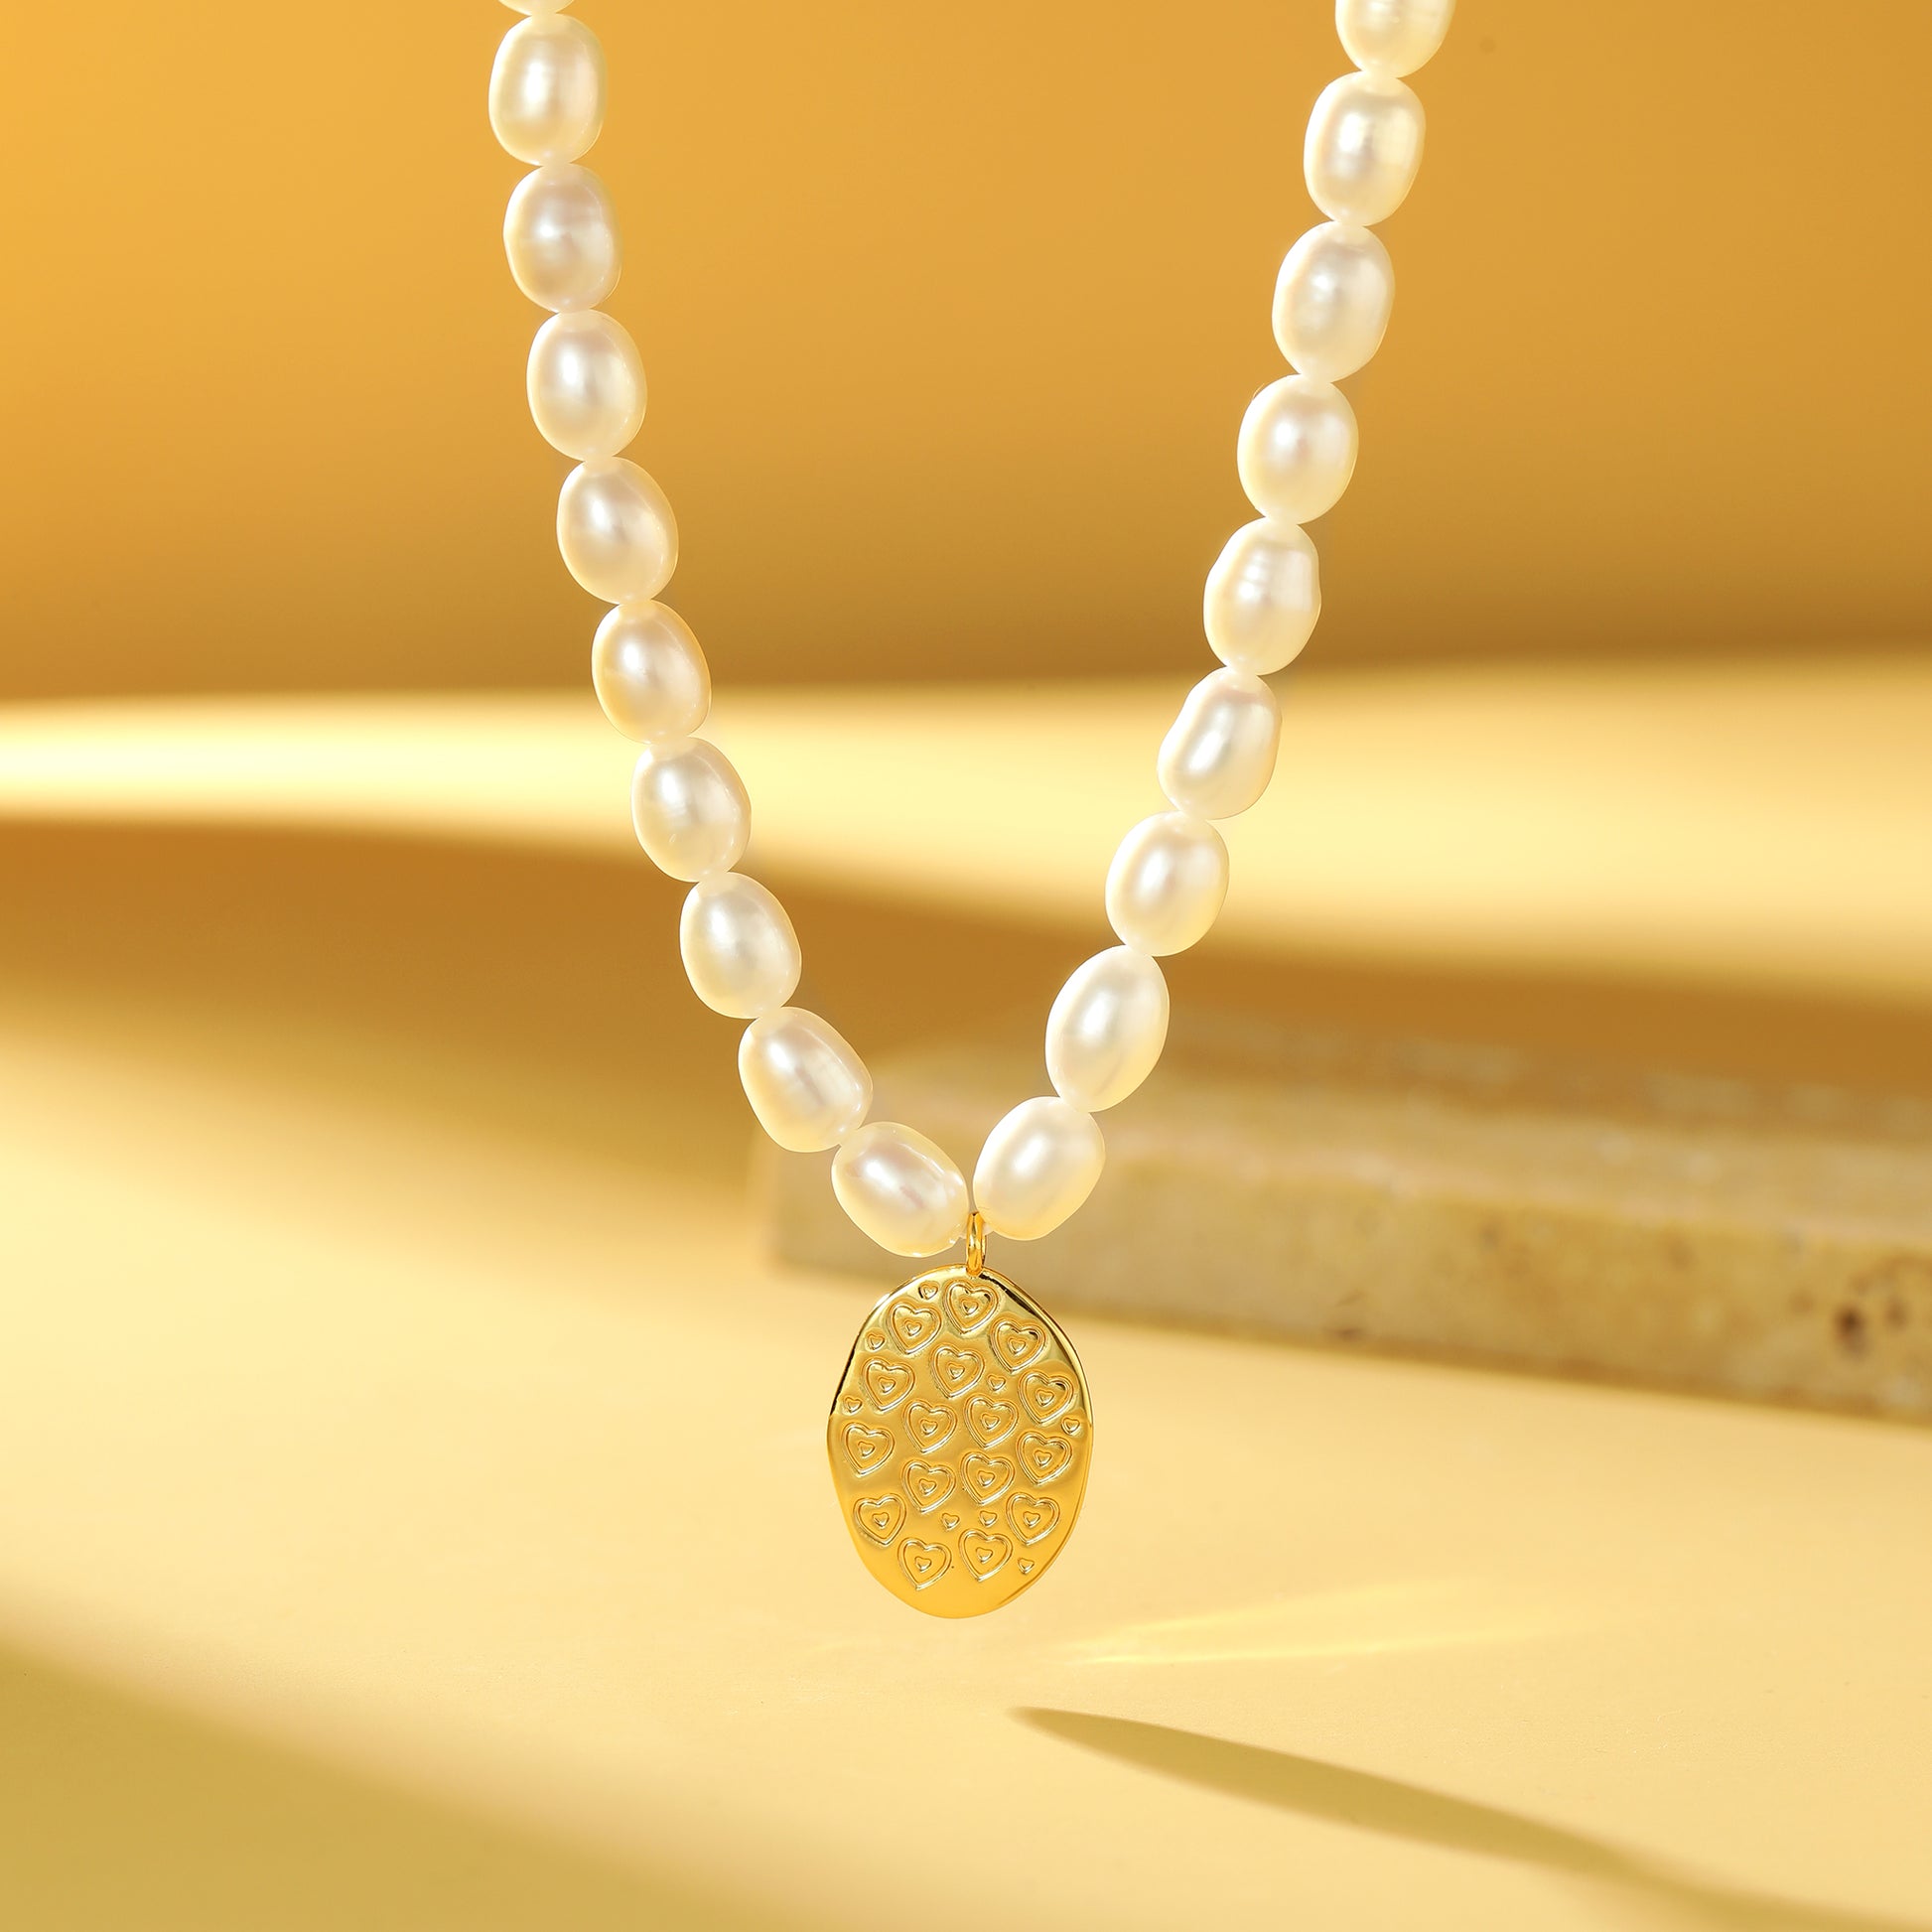 Handcrafted Rose Pendant Pearl Beaded Necklace - Double Sided - 14K Gold Filled - Necklace - ONNNIII